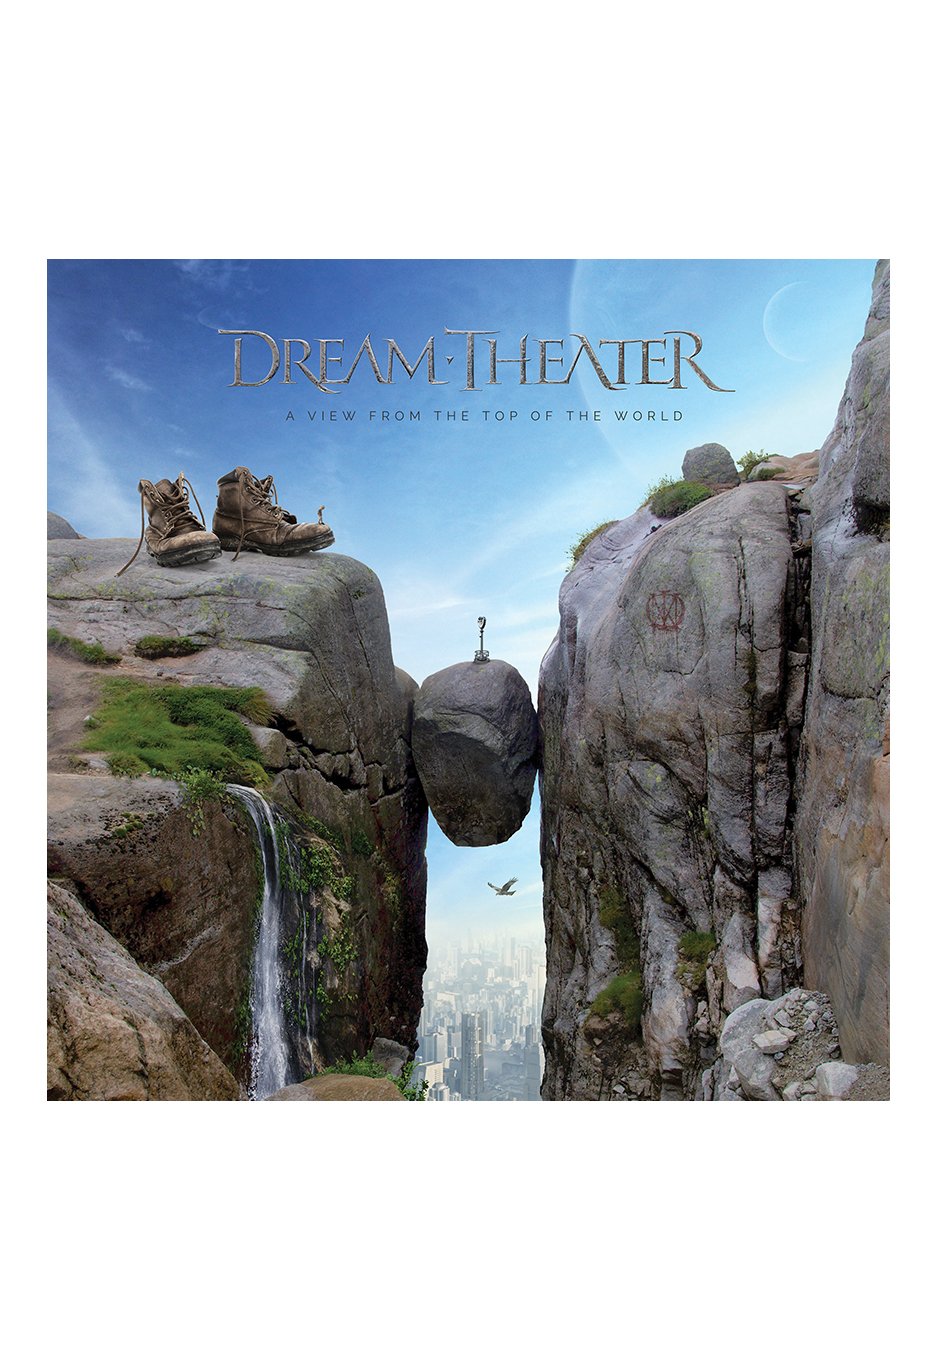 Dream Theater - A View From The Top Of The World Ltd. Deluxe - Artbook 2 CD + Blu Ray 